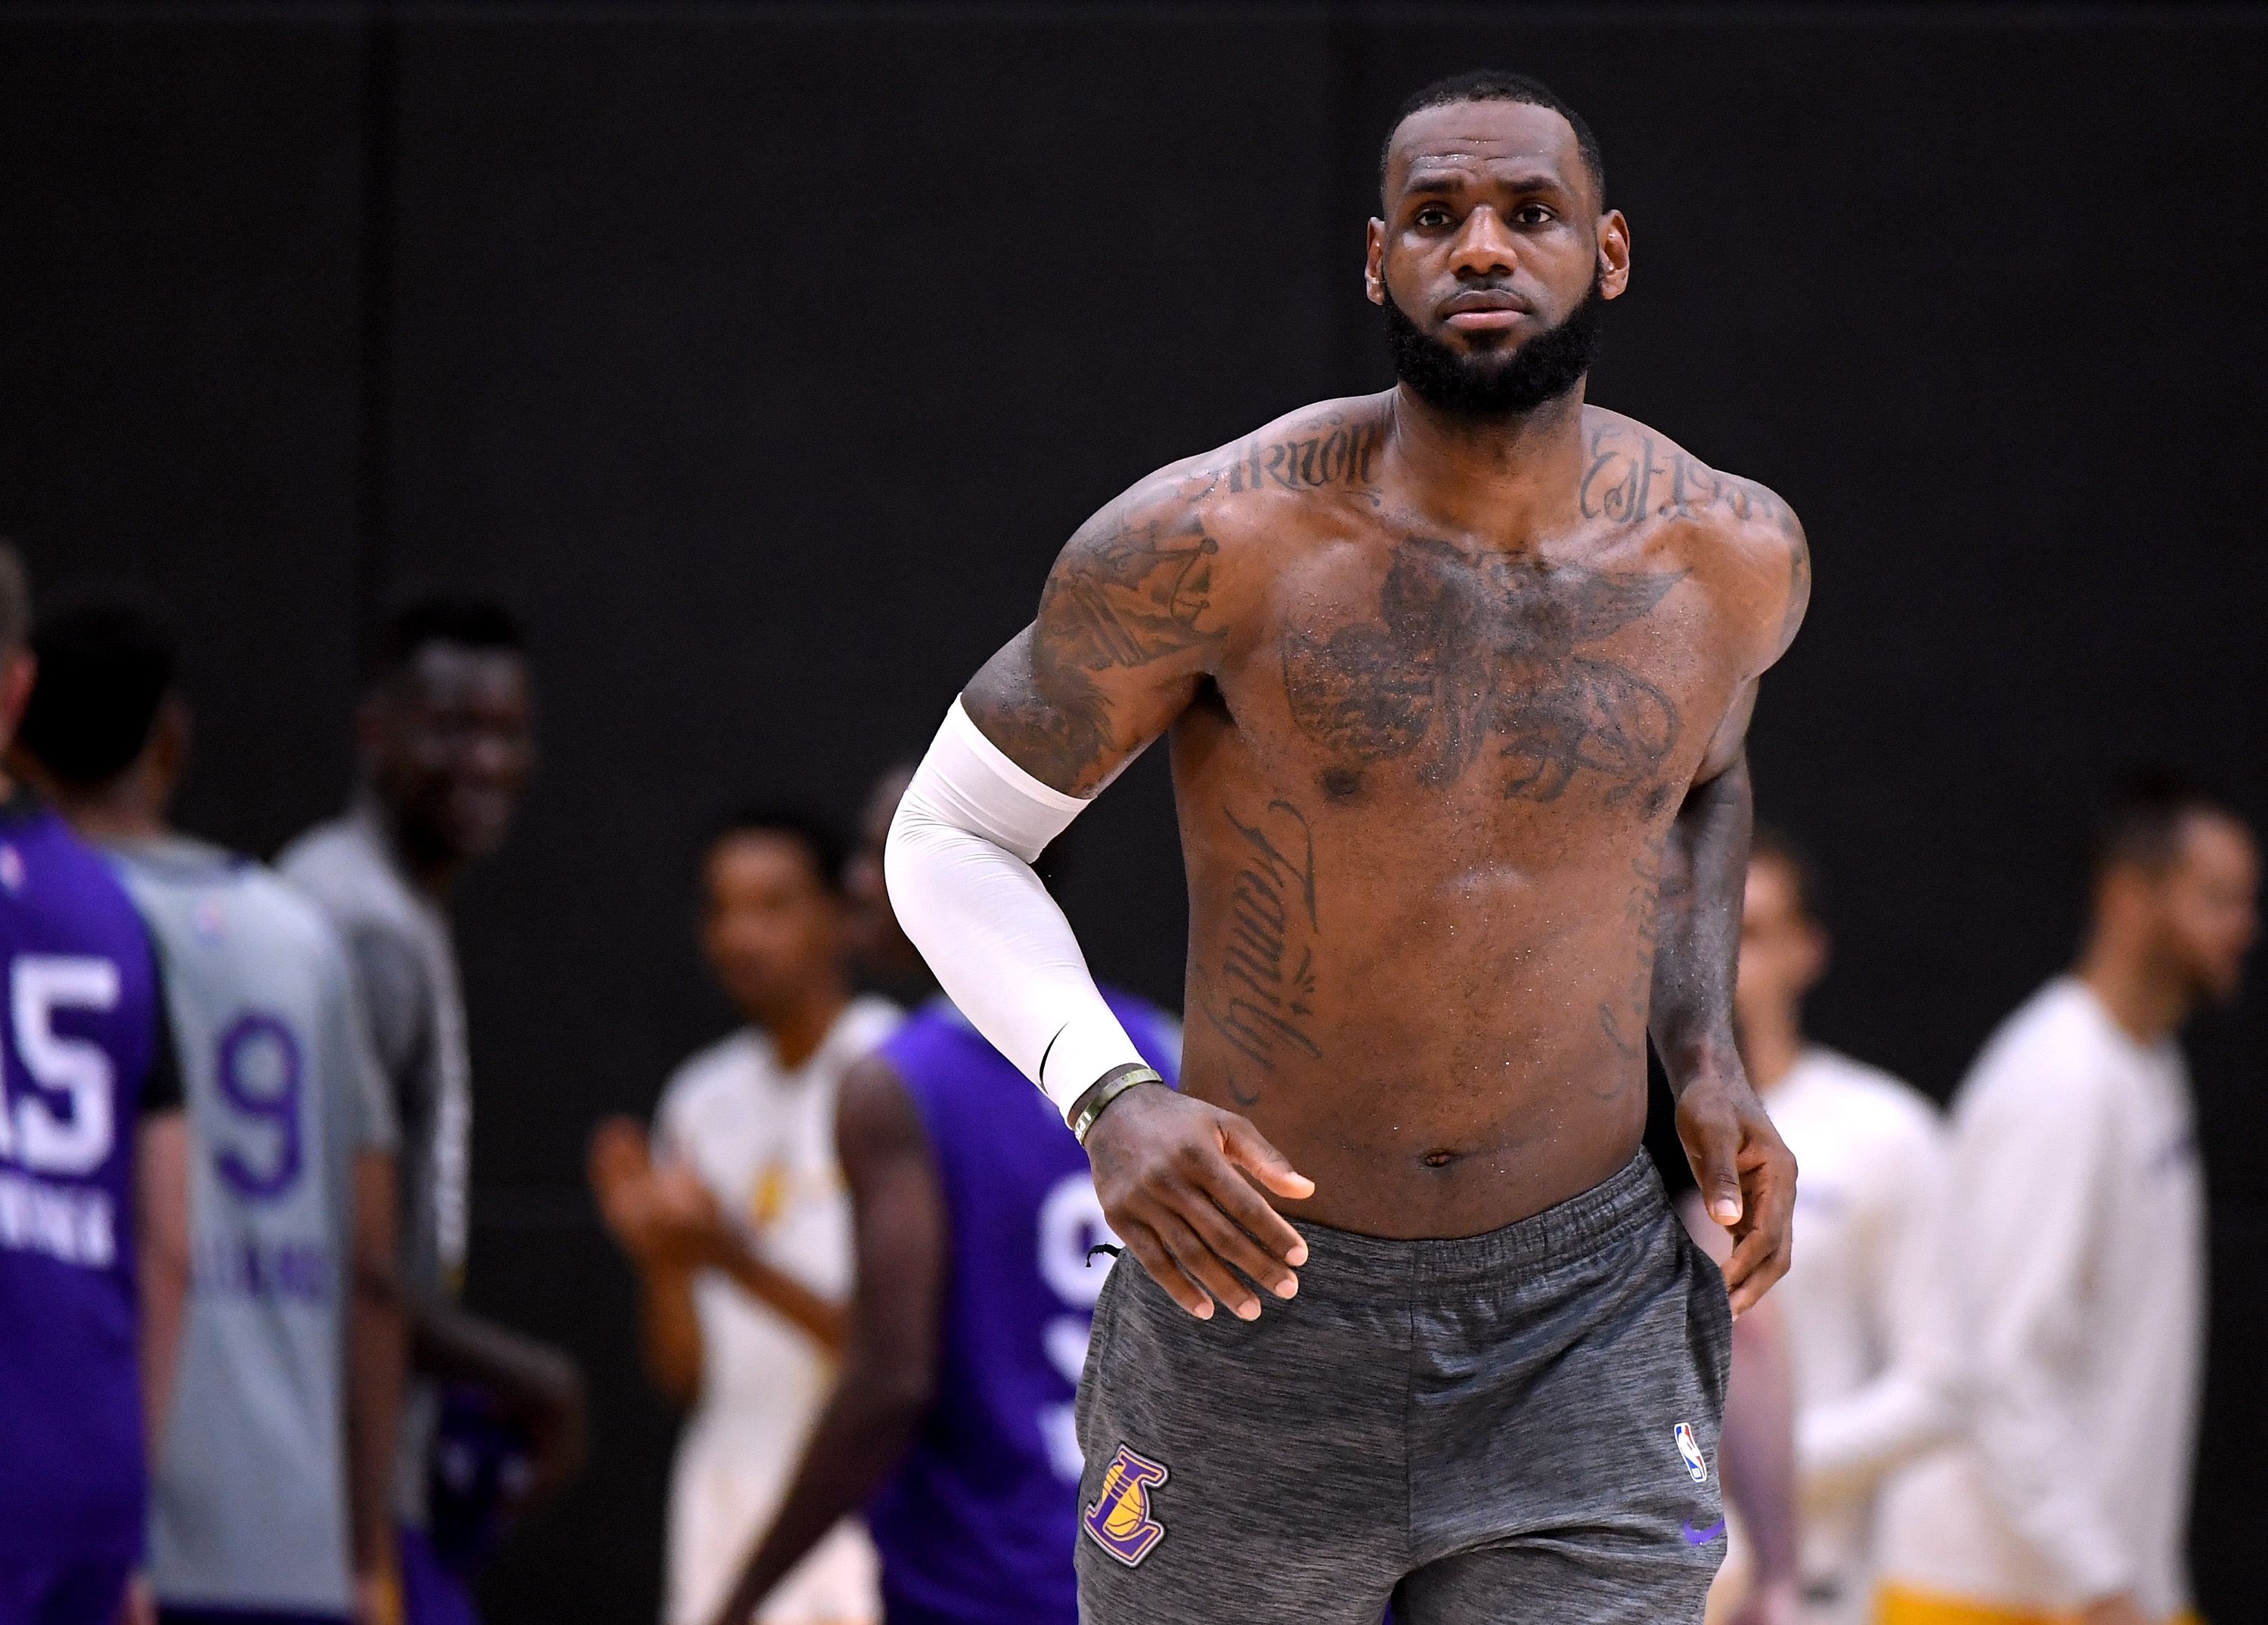 Every known LeBron James tattoo on his body